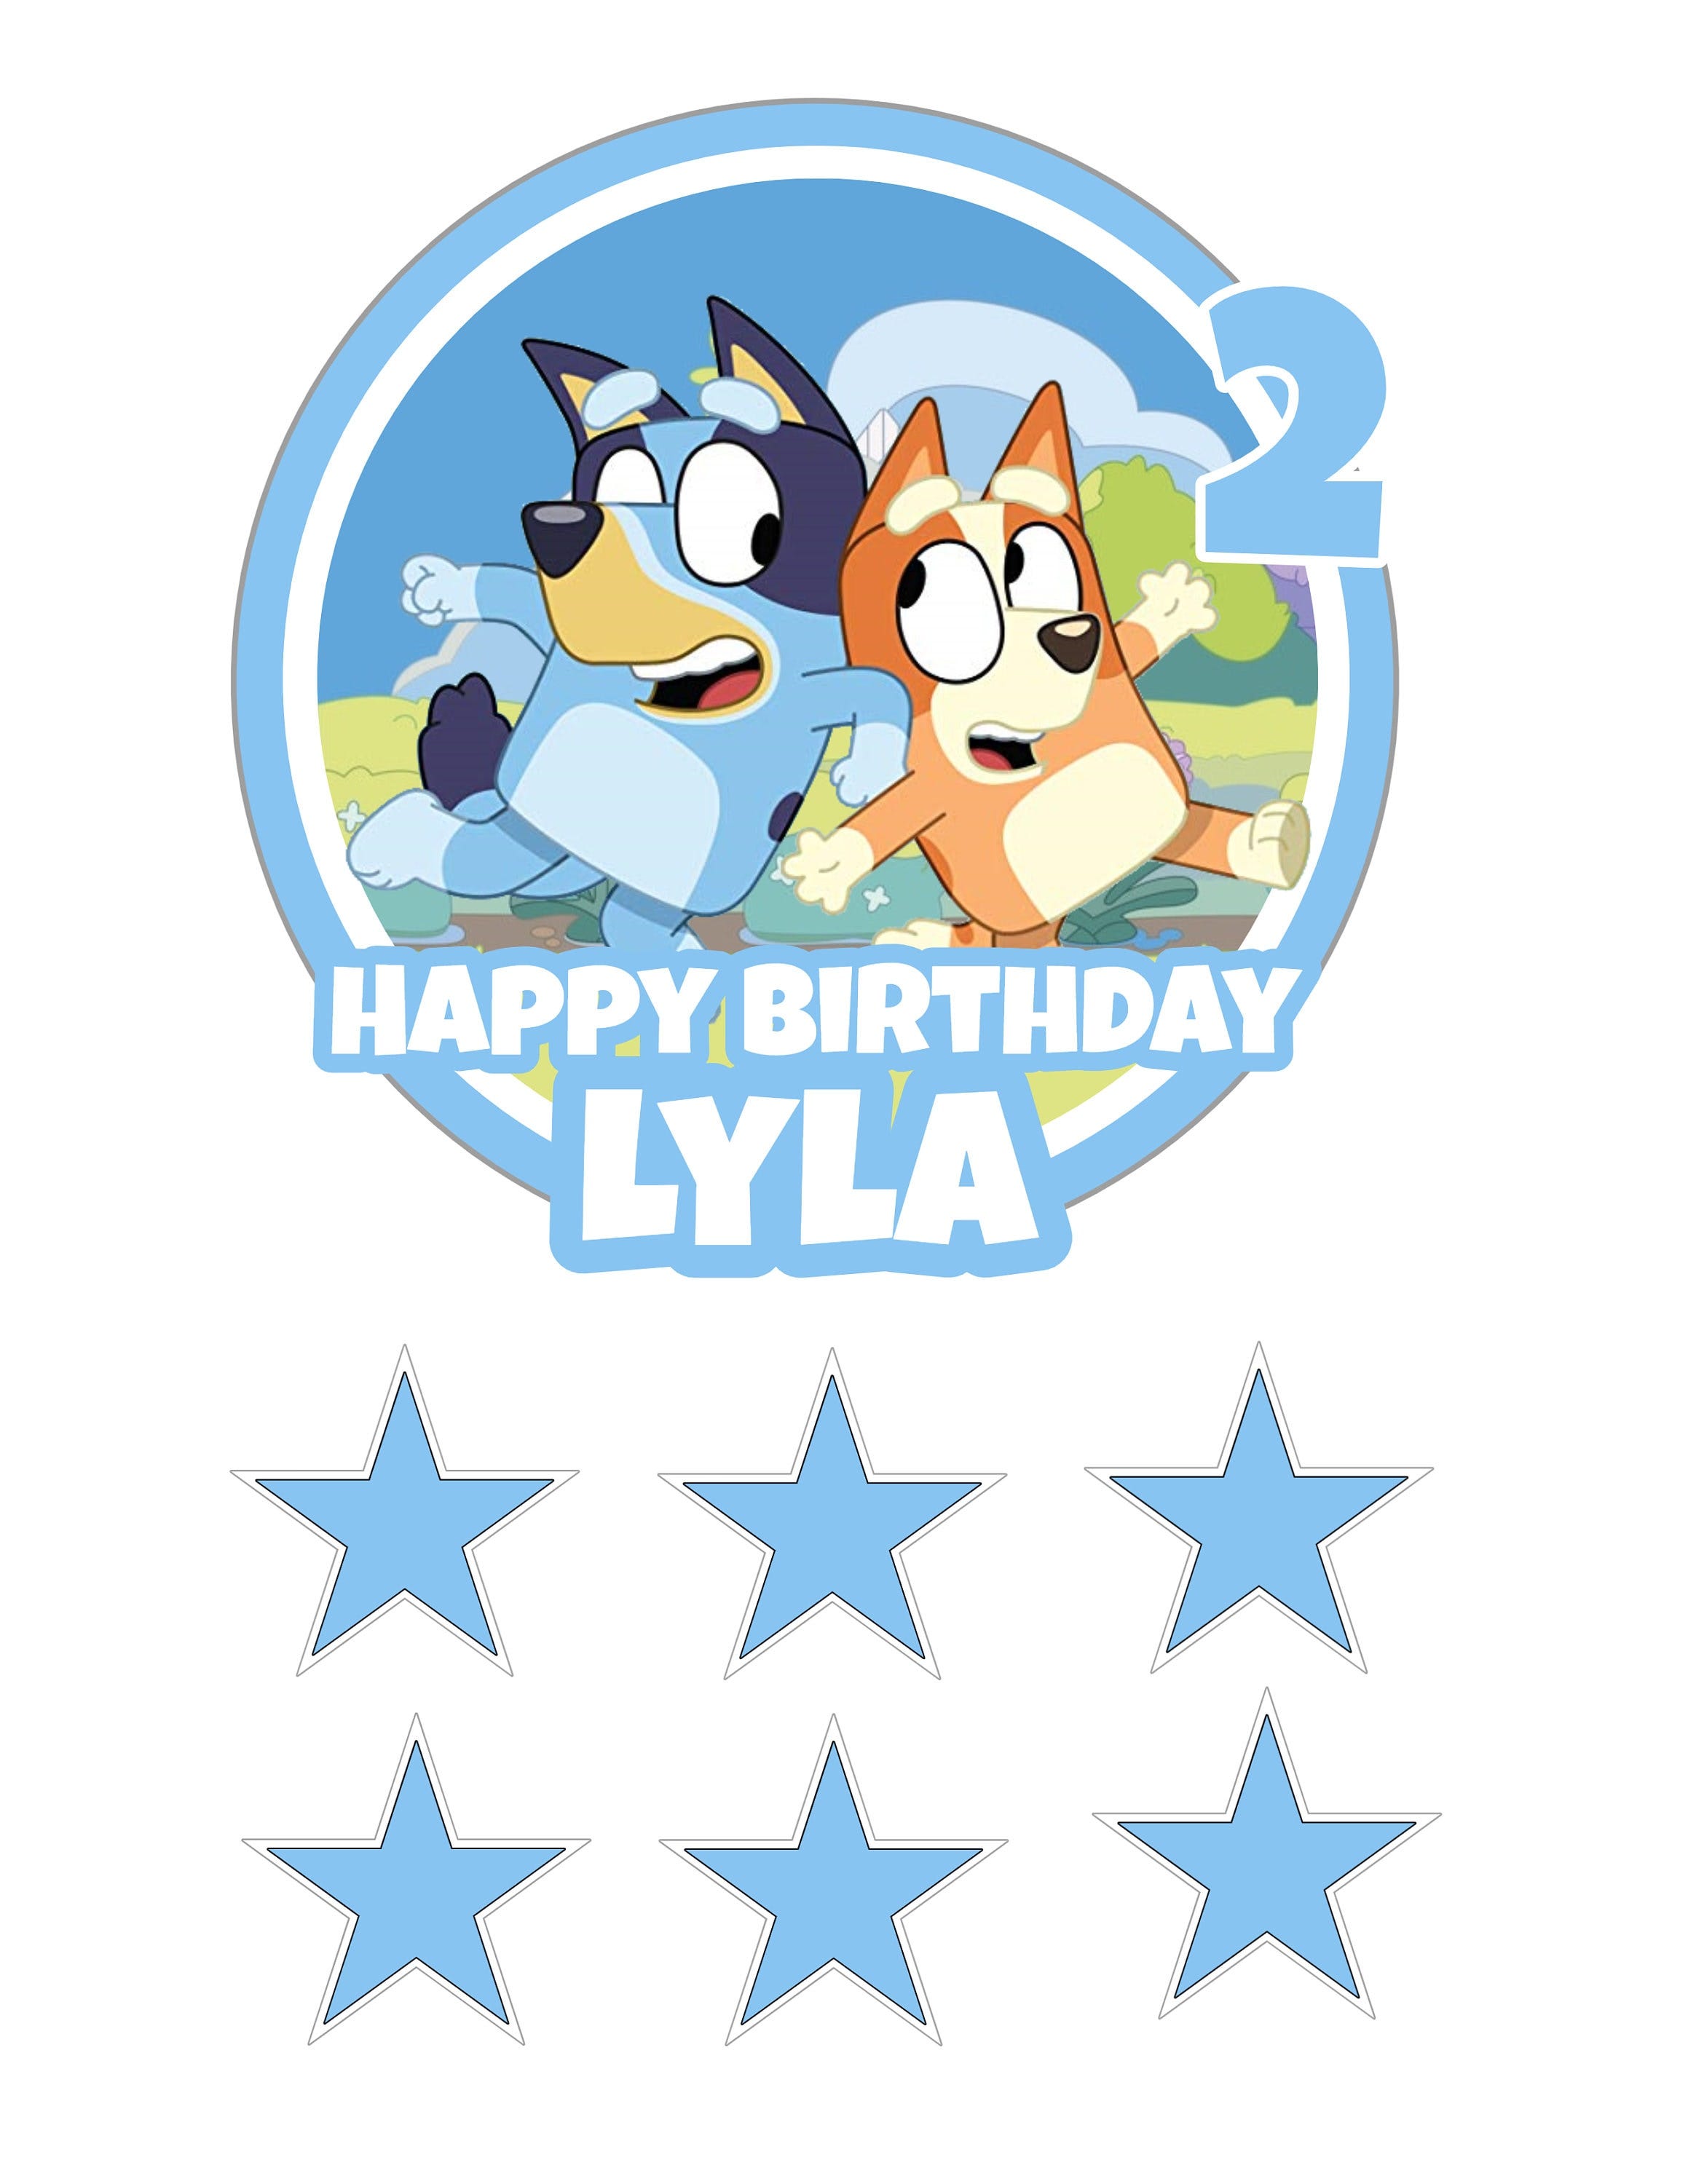 Bluey Custom Printable Digital Cake Topper and stars - Ready to download same day